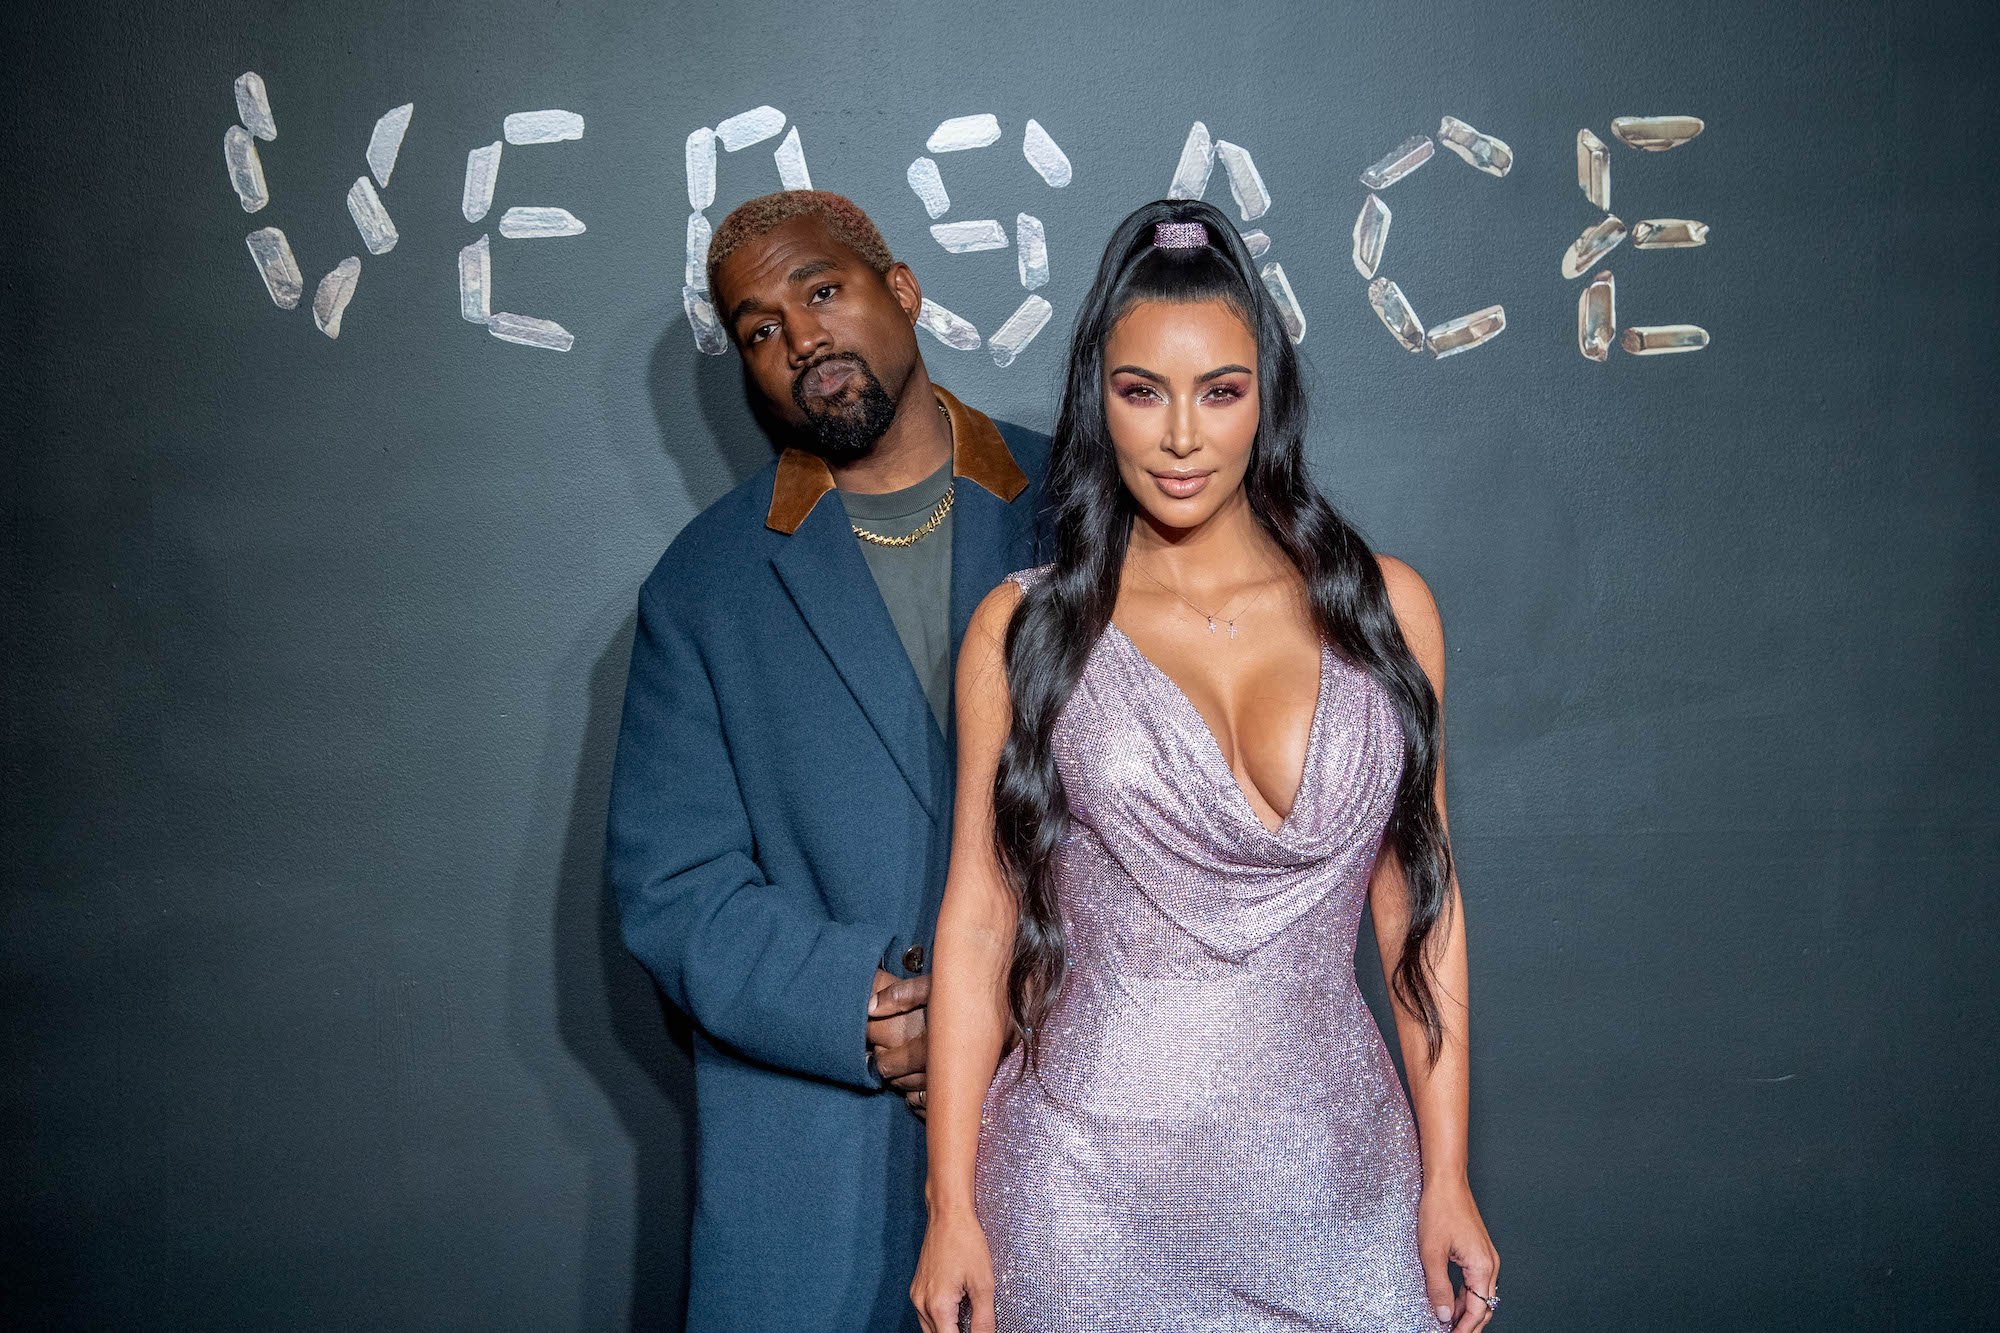 Kanye West and Kim Kardashian West attending the Versace Fall 2019 Fashion Show in NYC